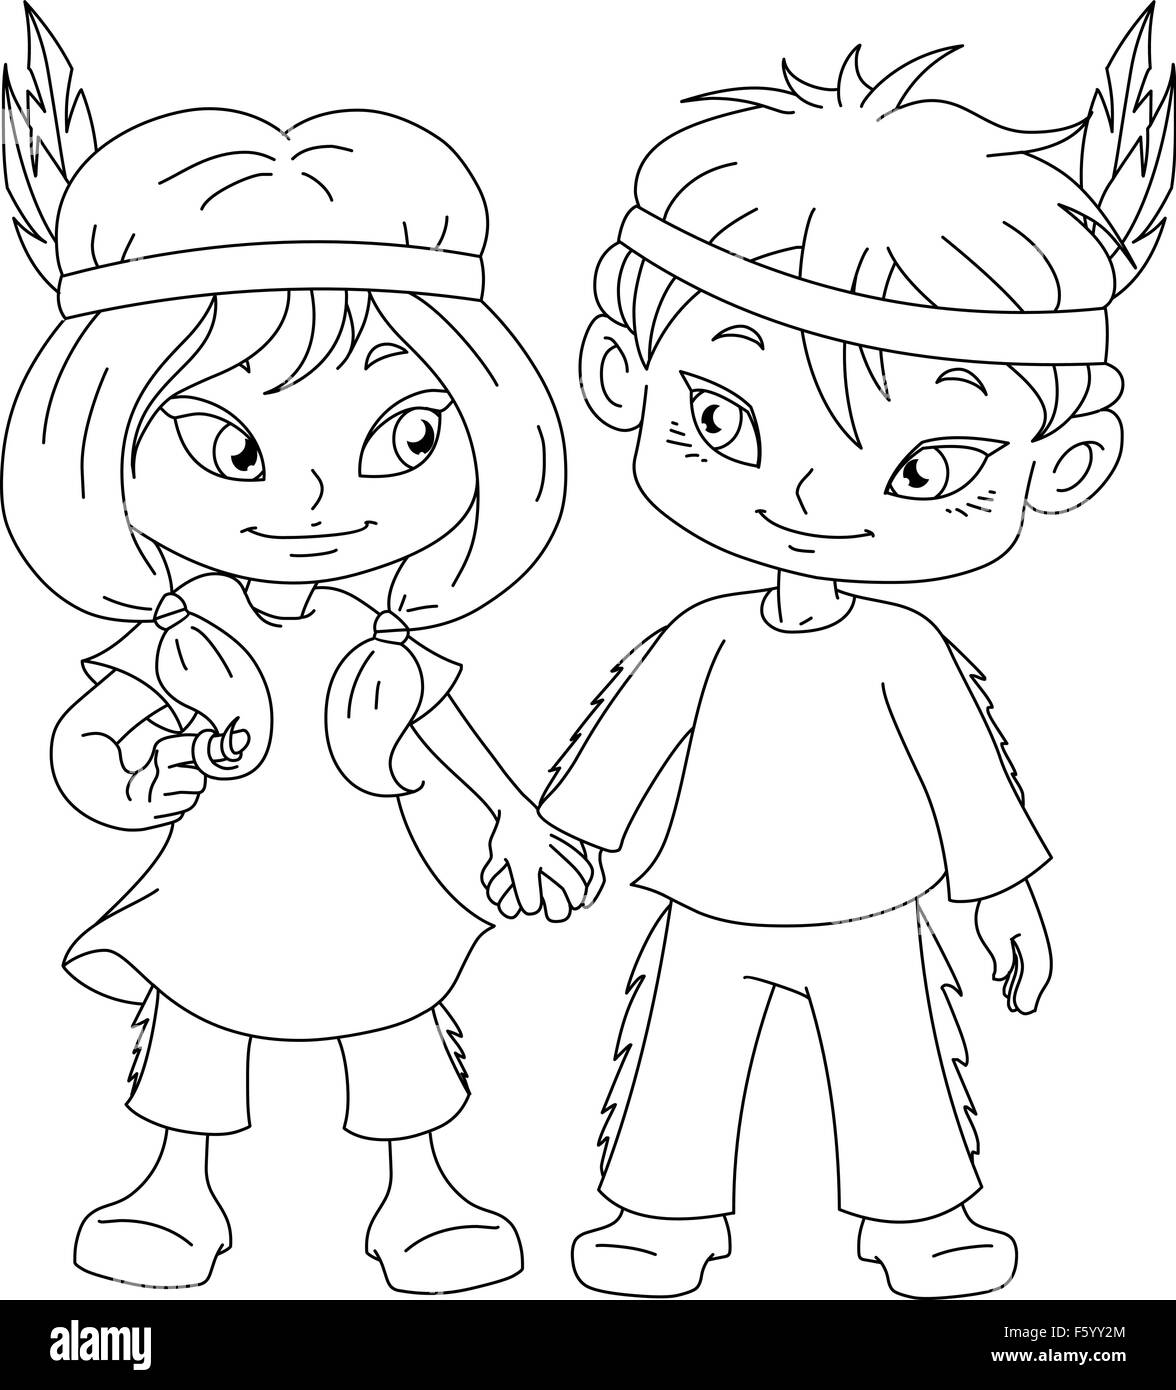 Vector illustration coloring page of children dressed as Indians and holding hands for Thanksgiving or Halloween. Stock Vector